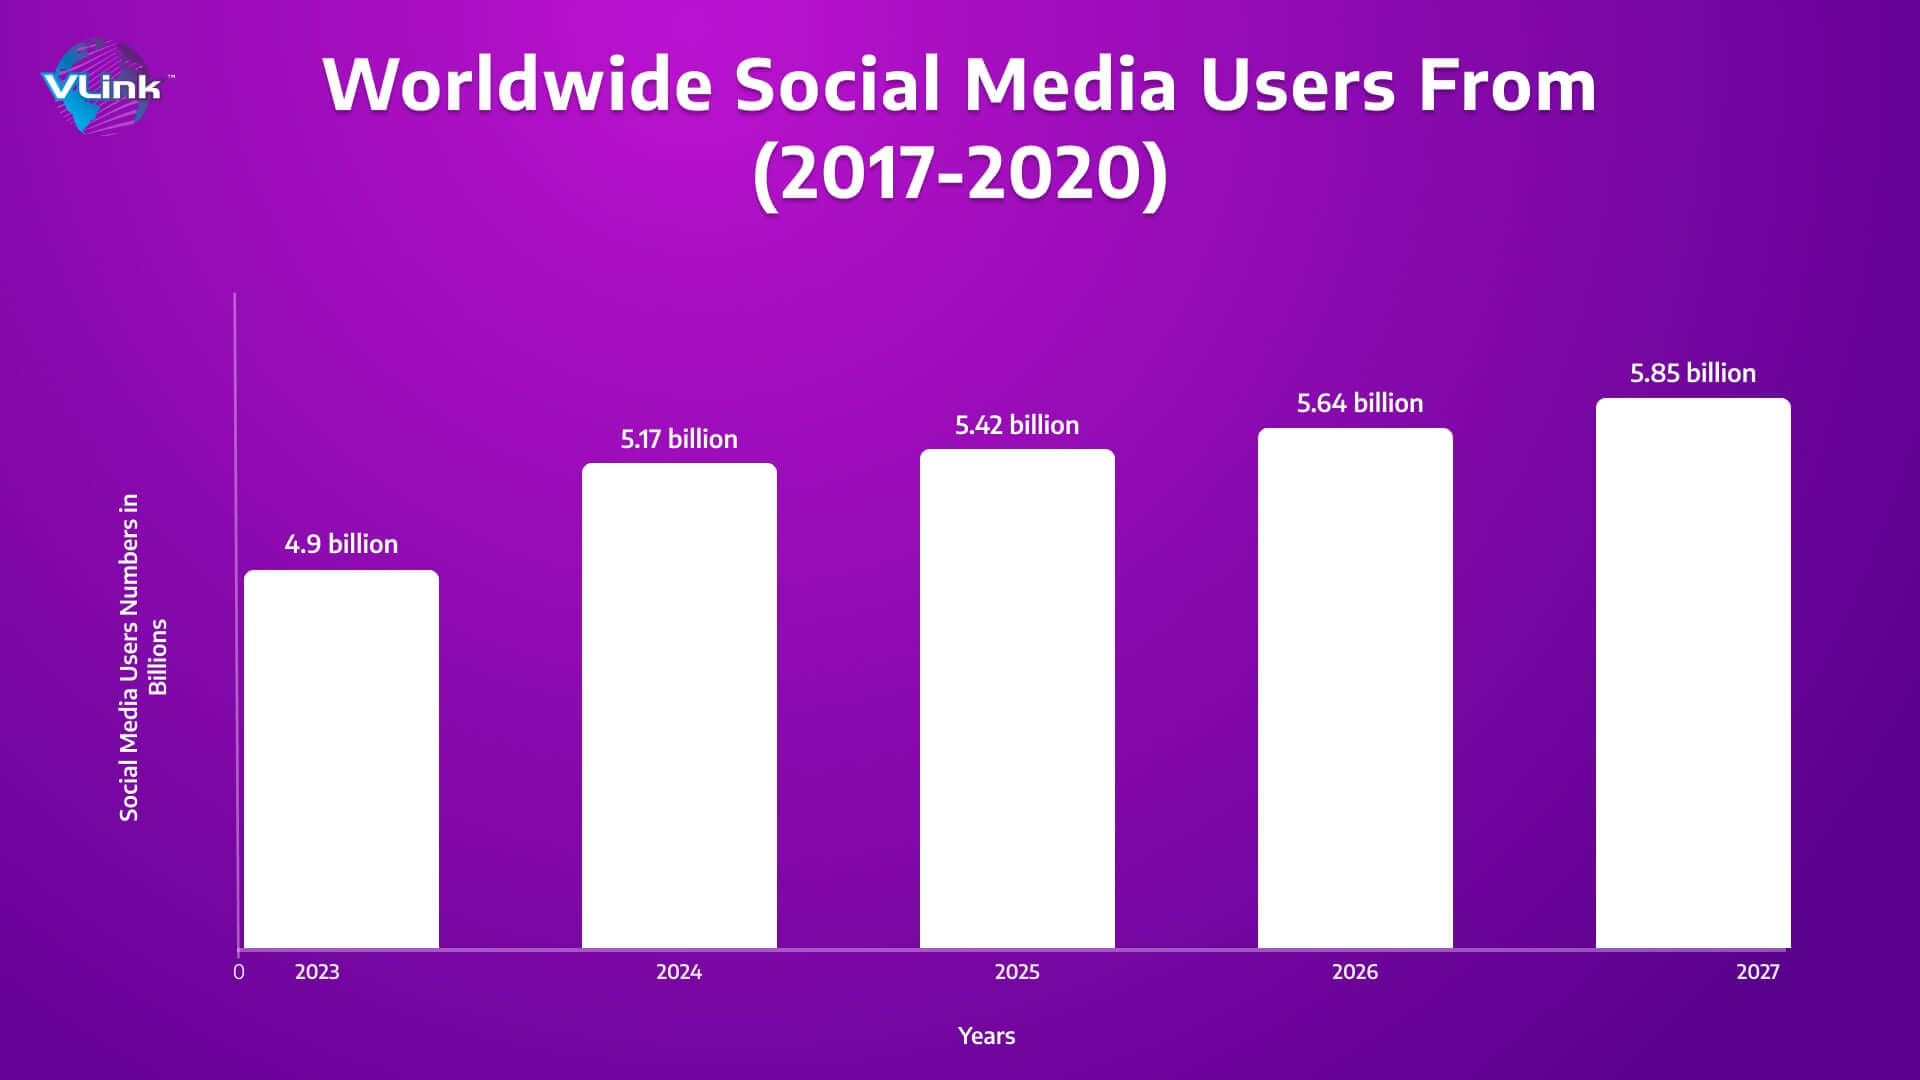 Worldwide Social Media Users From (2017-2020)